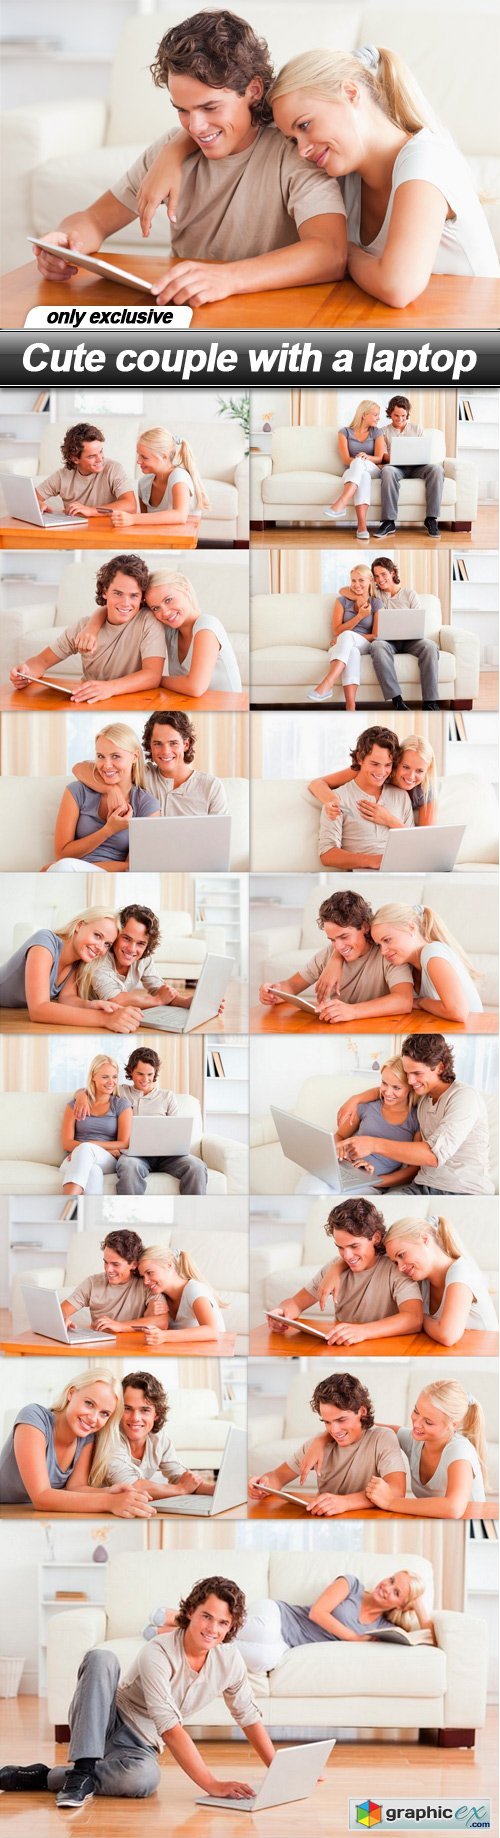 Cute couple with a laptop - 15 UHQ JPEG